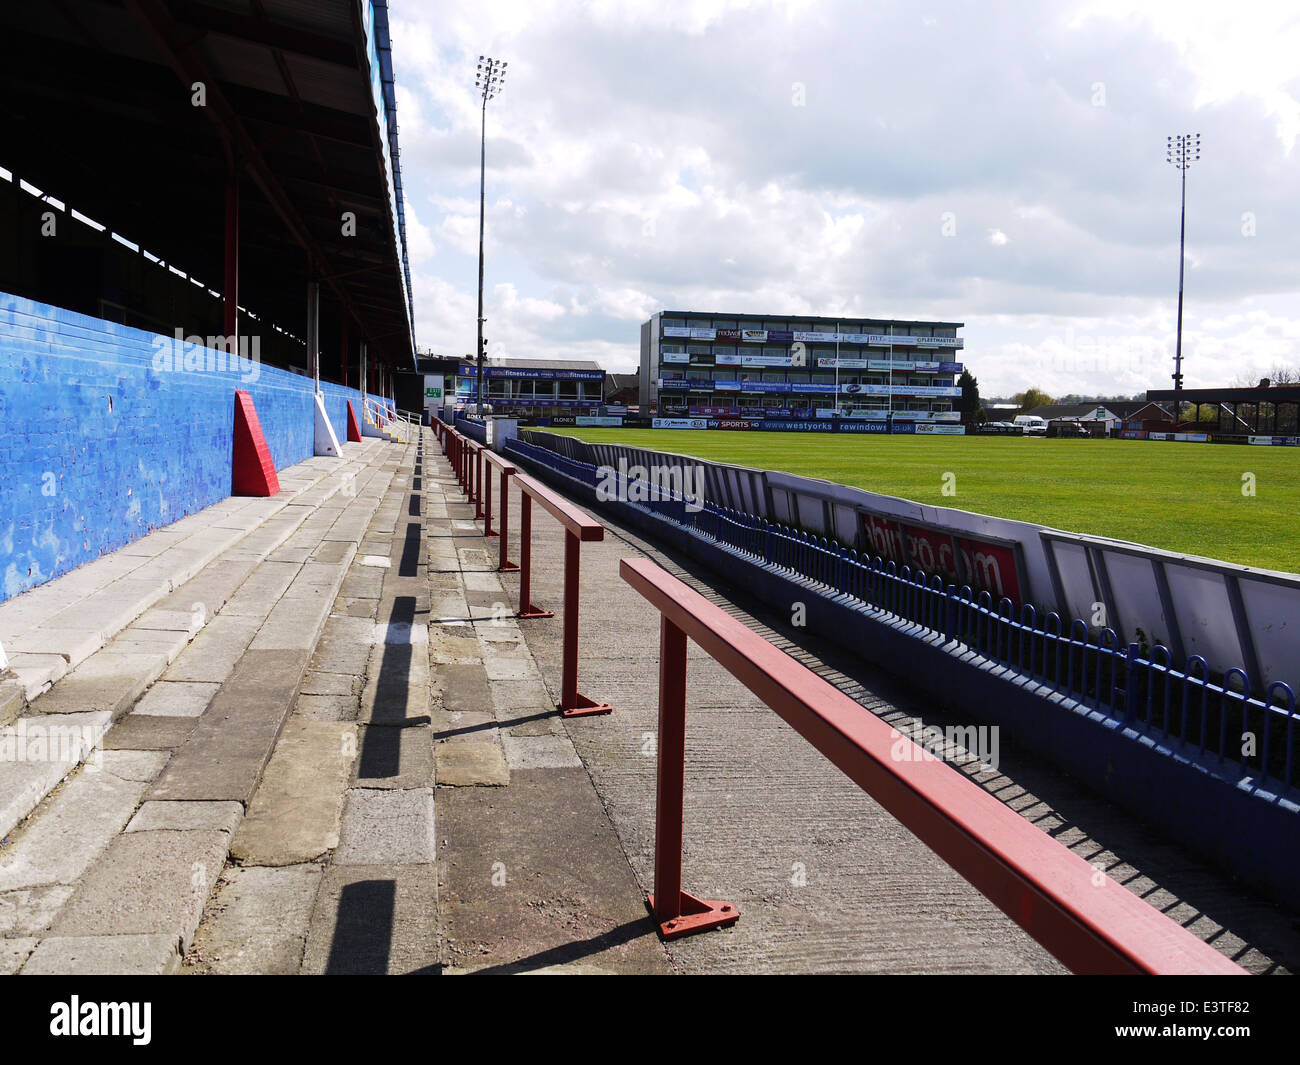 Wide Shot of The Rapid Solicitors Stadium. Belle Vue. Home of Wakefield Trinity Wildcats. Showing terracing & roof of stand. Stock Photo